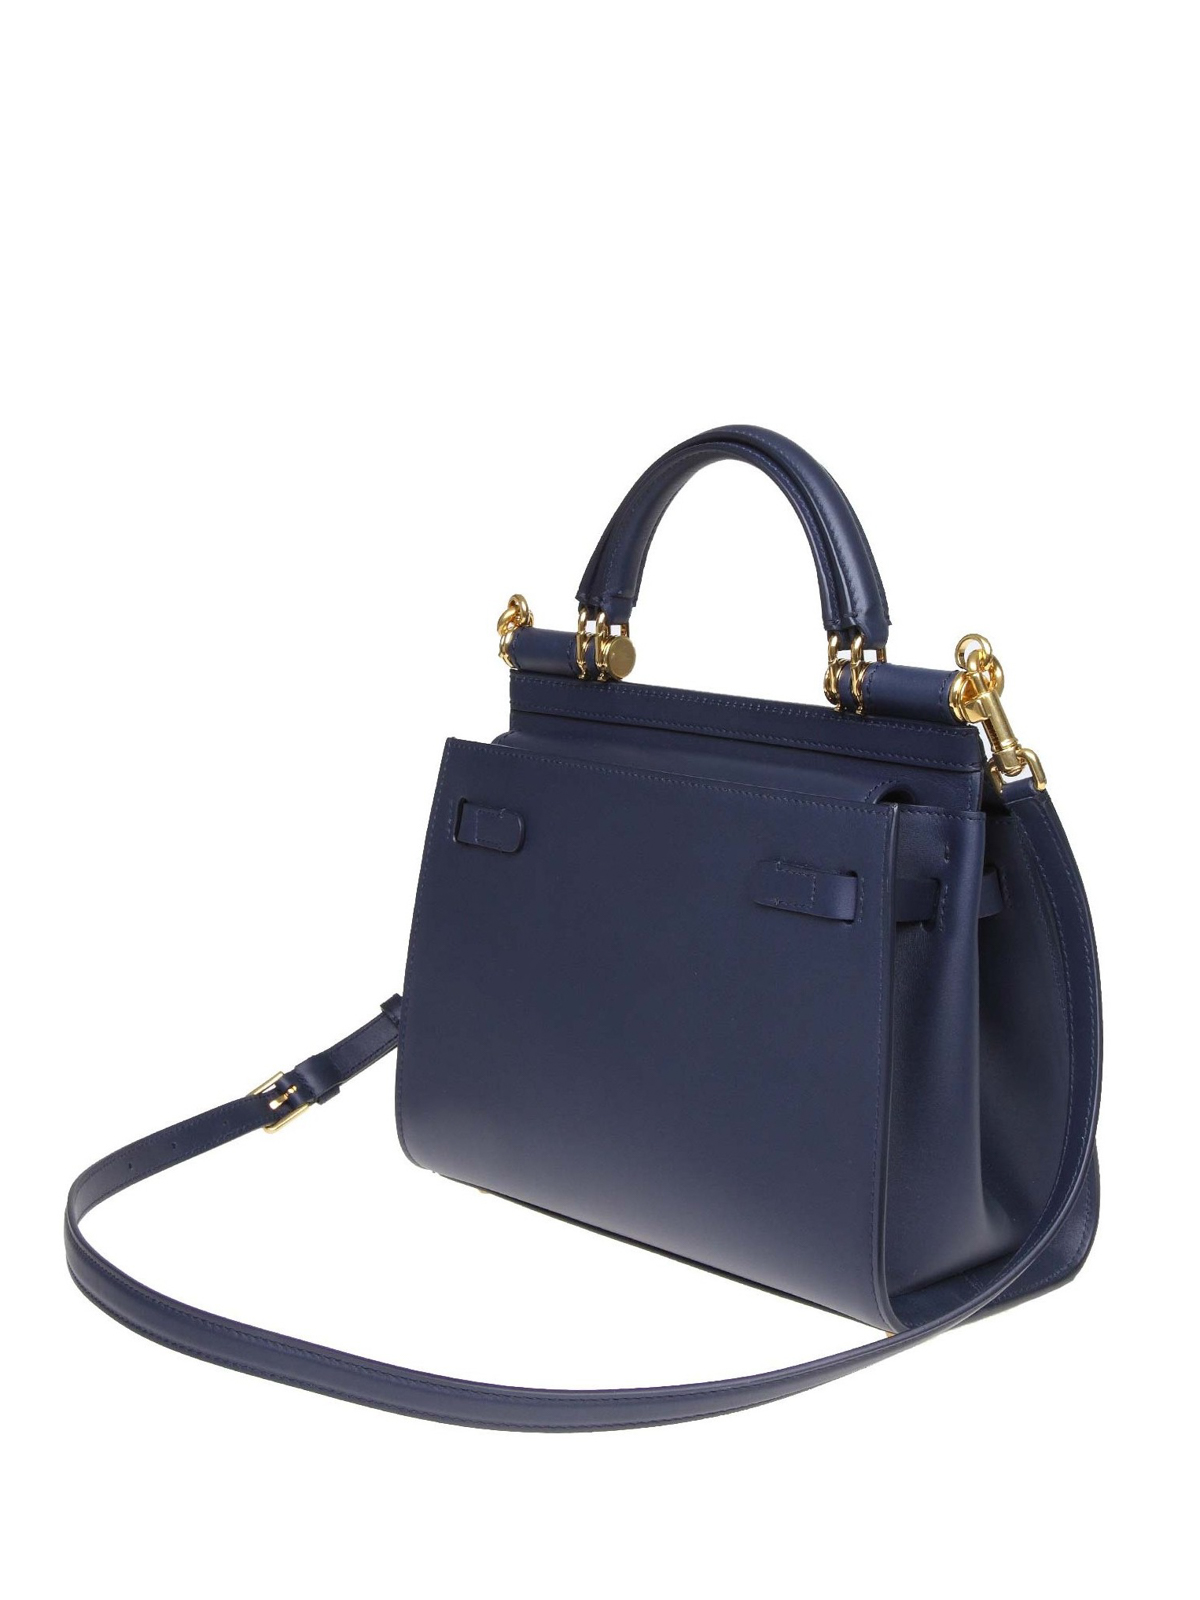 Dolce & Gabbana Sicily Small Leather Bag in Blue